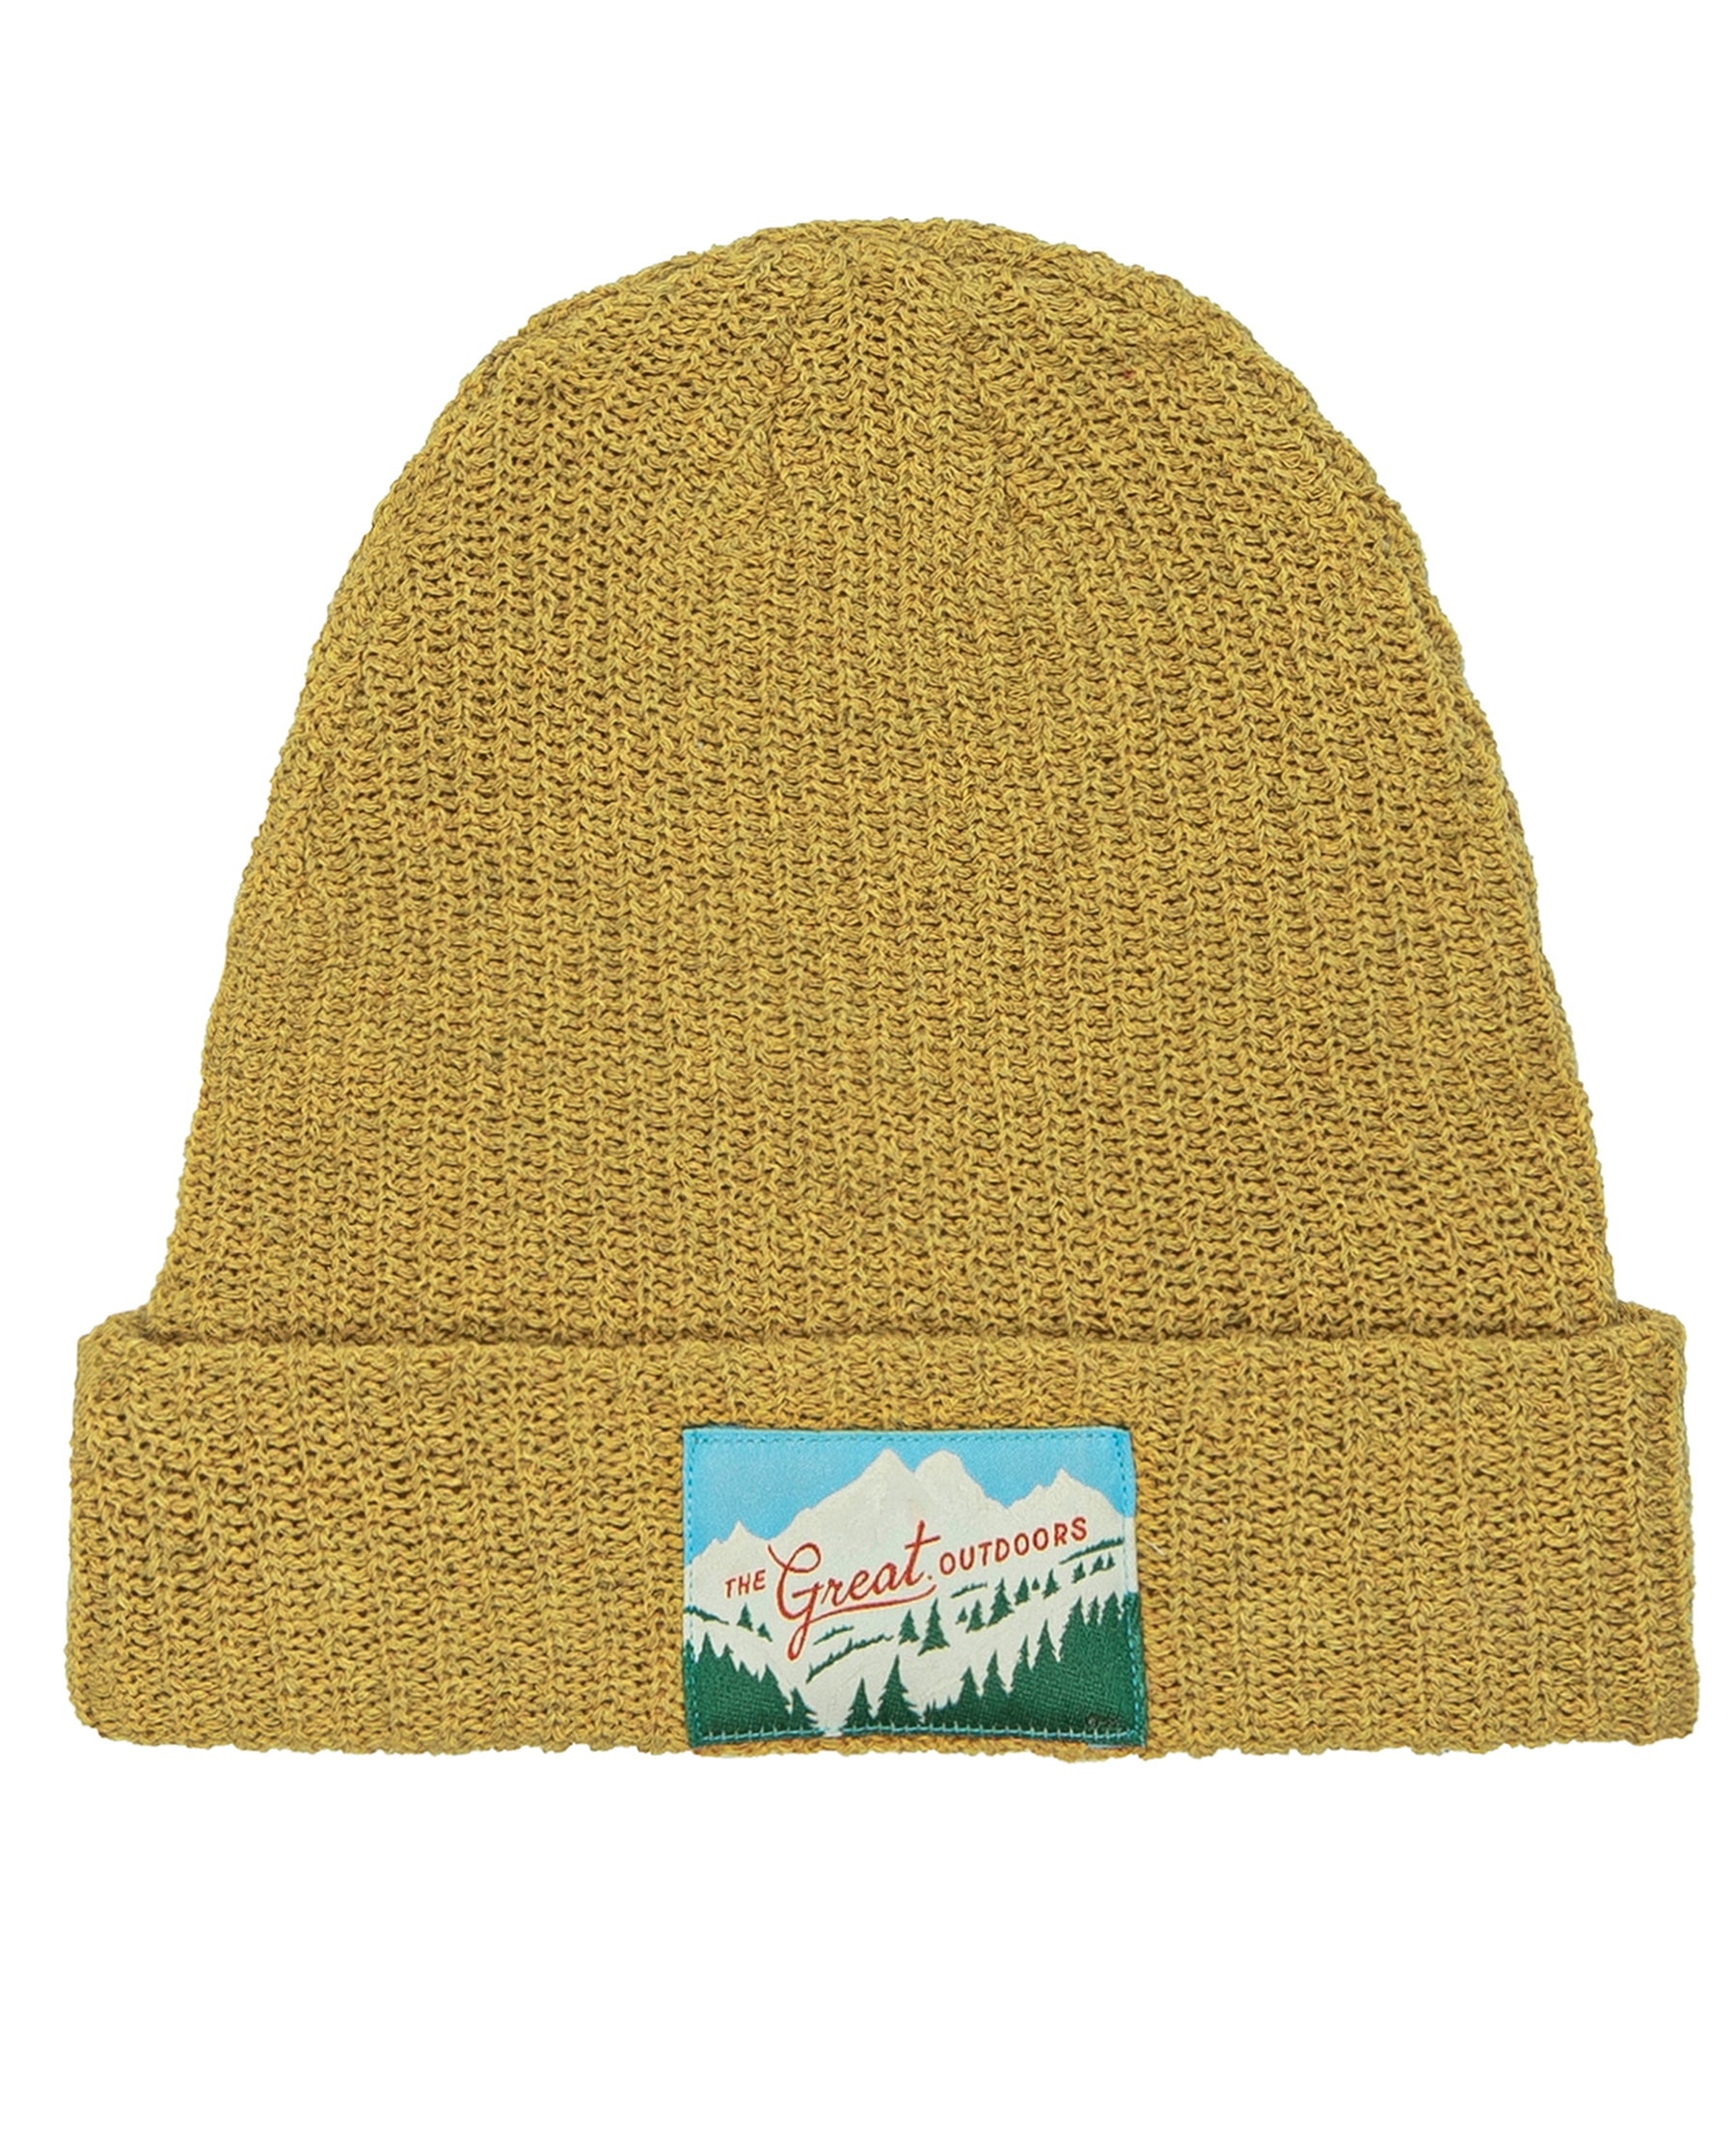 The Lookout Cap. -- Goldenrod